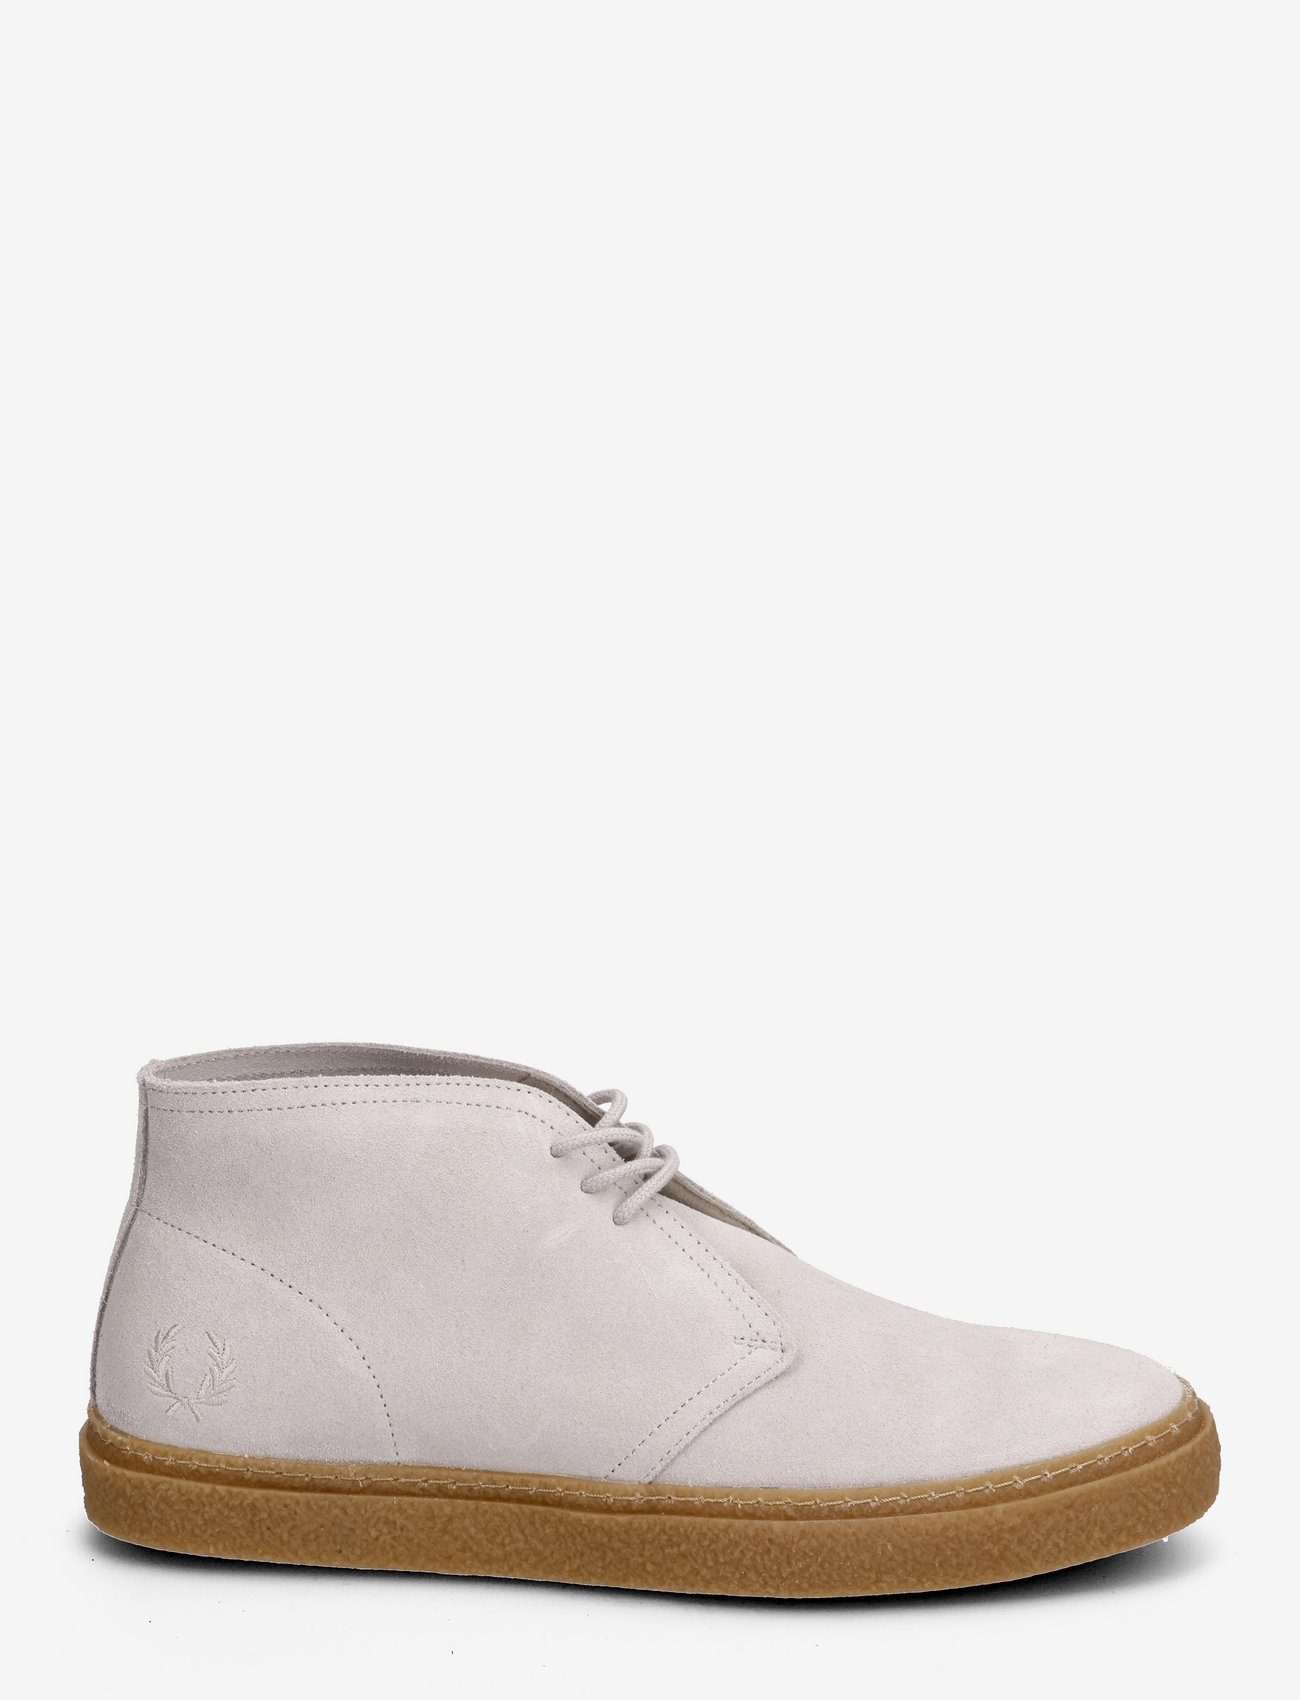 Fred Perry - HAWLEY SUEDE - shop etter anledning - light oyster - 1